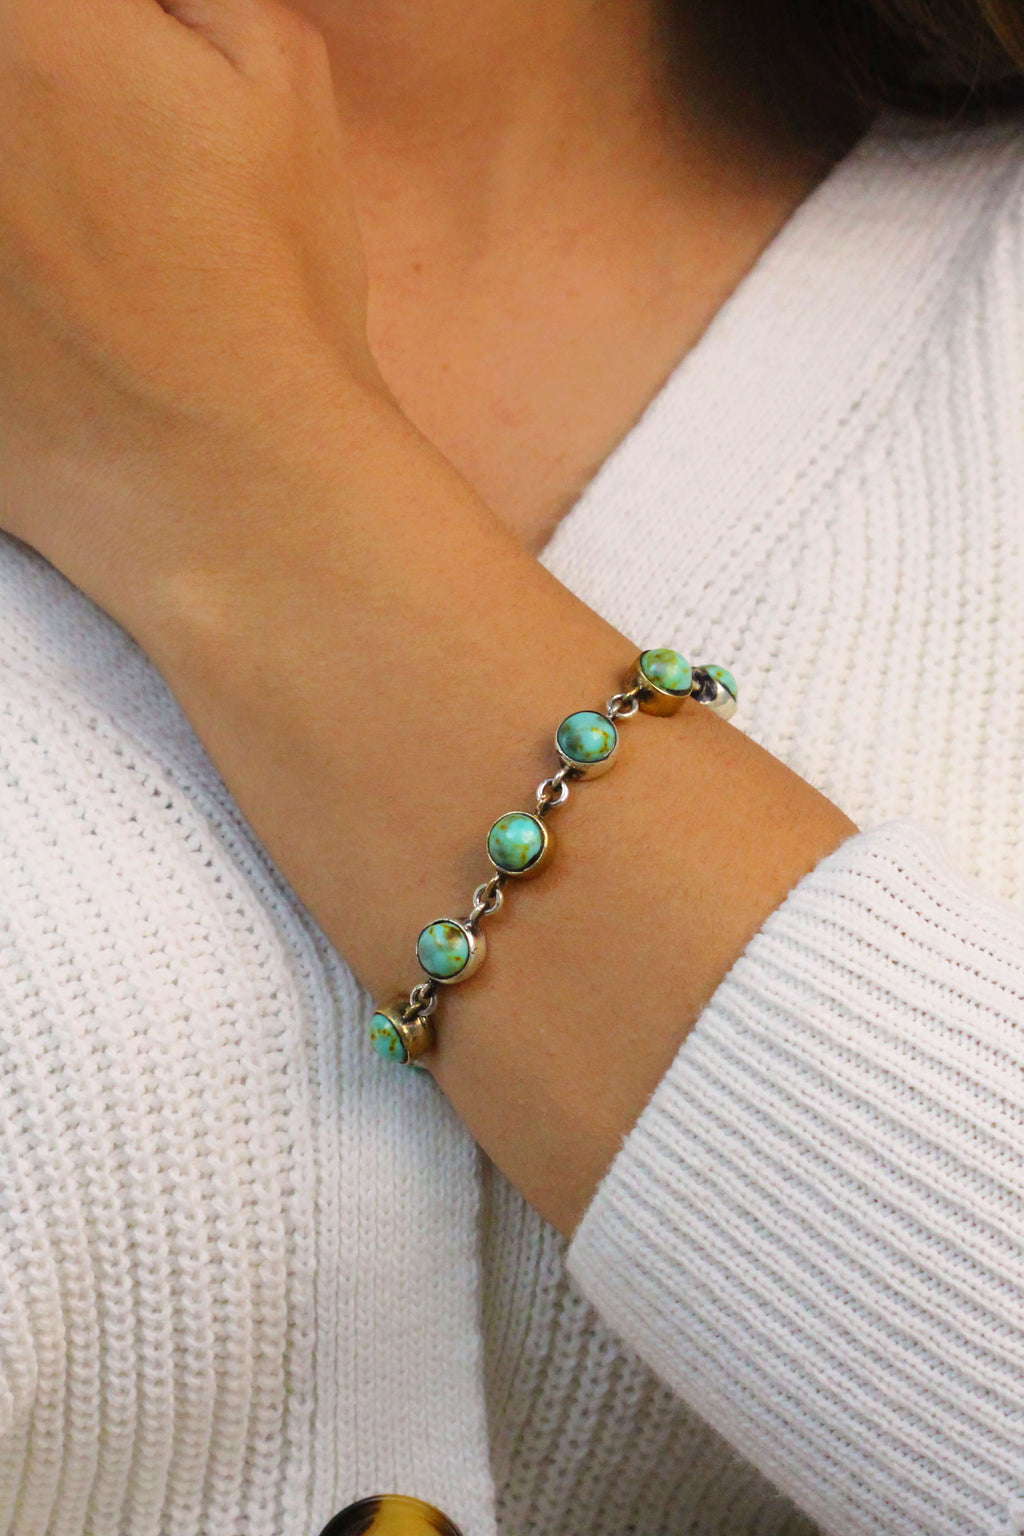 Authentic Handmade Sterling Silver Bracelet With Turquoise (NG201015741)